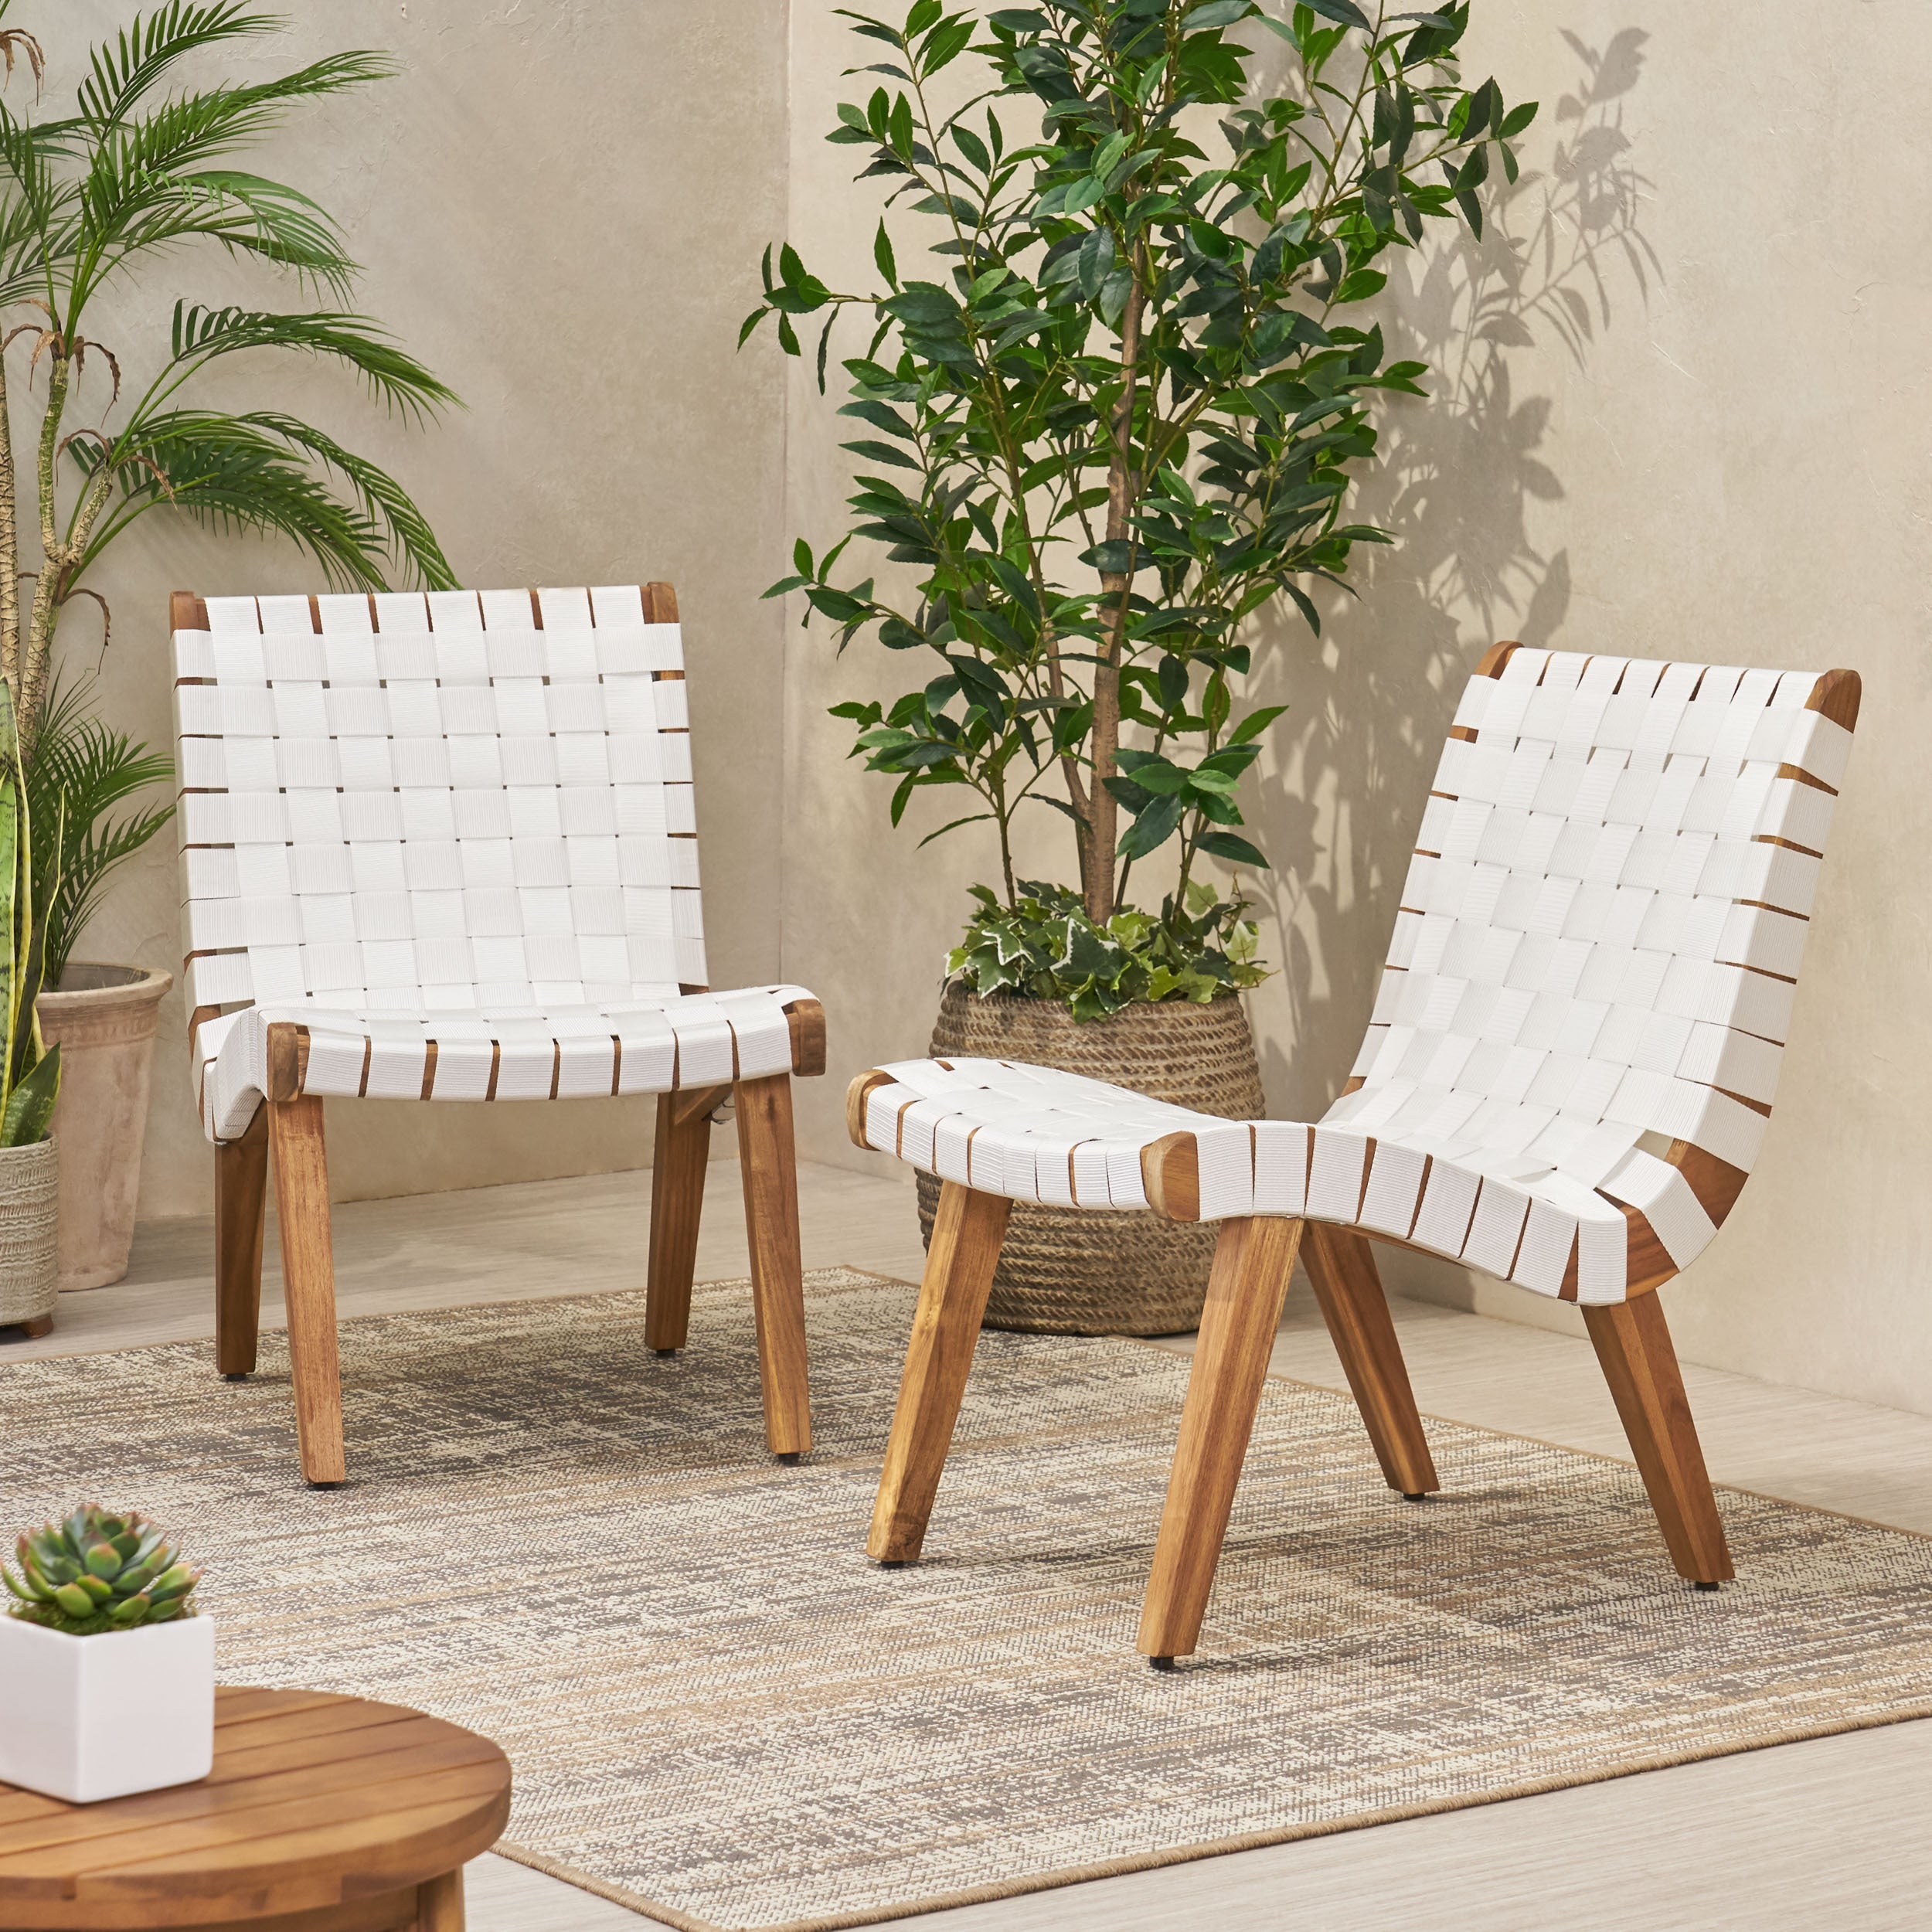 TM-HOME-OUTDOOR--LOUNGE-CHAIRS-SET-OF-2-Furniture-|-Outdoor-Furniture-|-Outdoor-Seating-|-Outdoor-Chairs